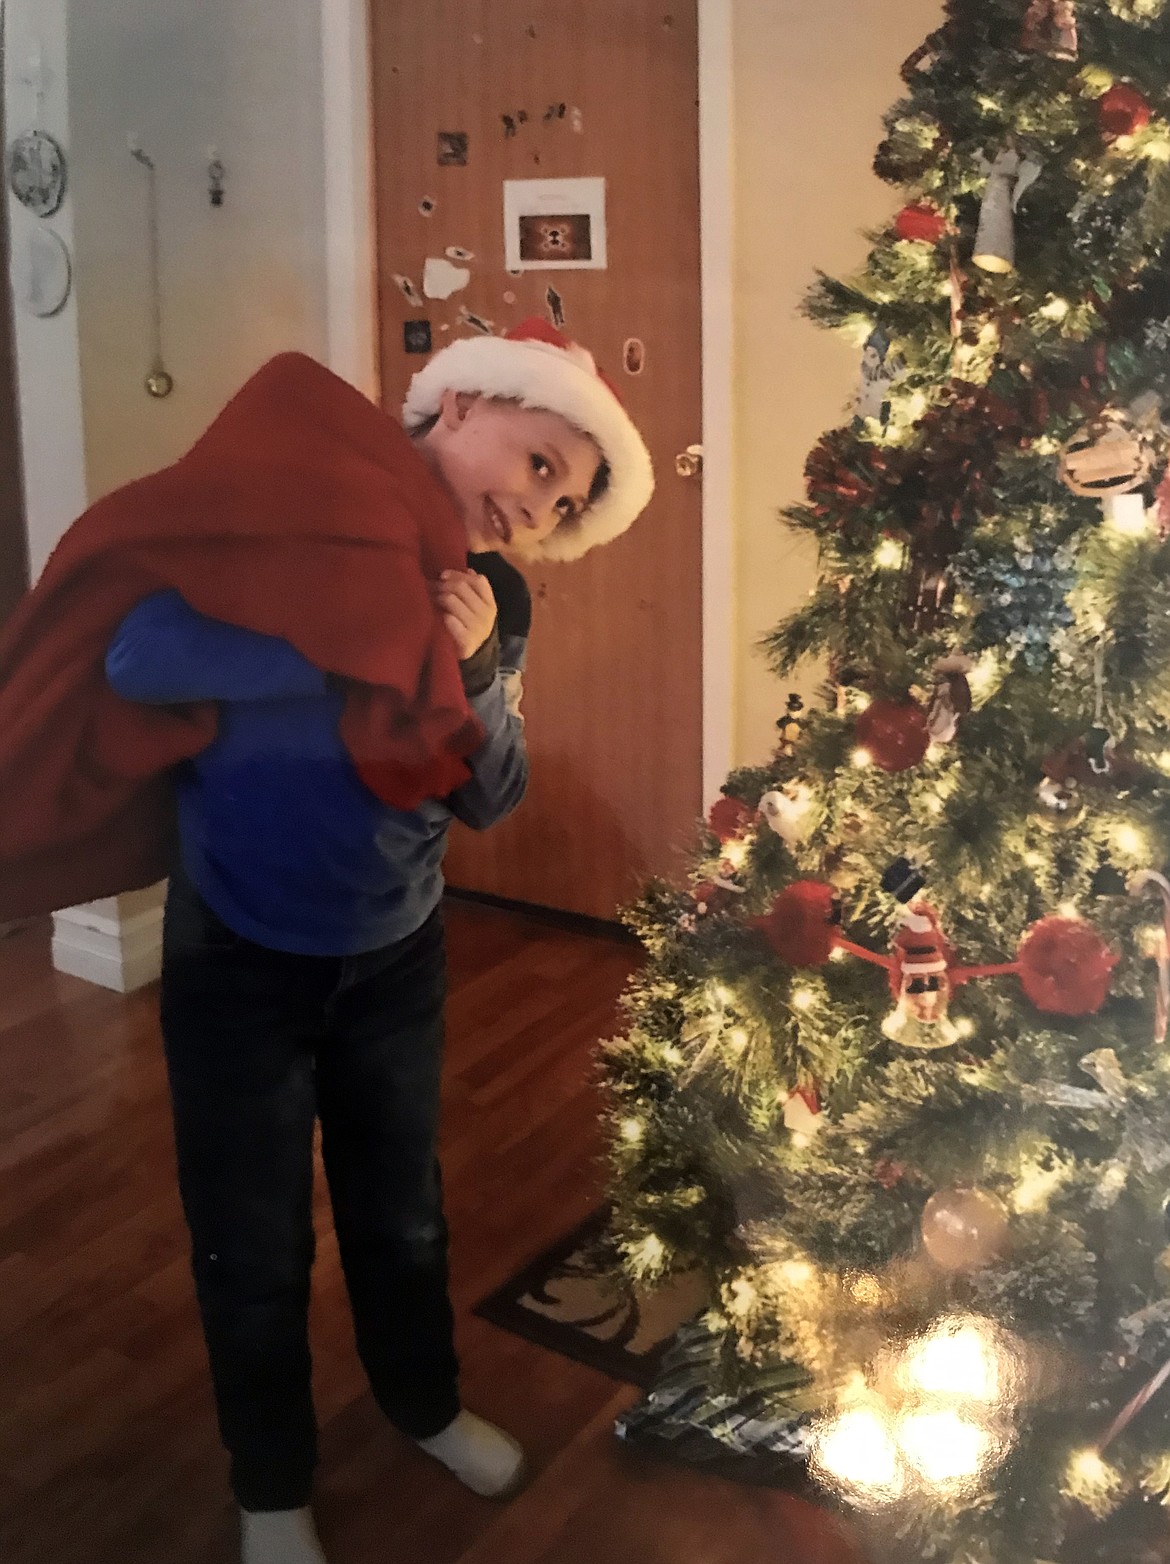 Aiden “Den” Dyer takes his turn as Santa Claus in a recent photo. Dyer was selected as the recipient of Jacey’s Race, which is taking place Sunday, in person and virtually with the course open from 8 a.m. to noon with a running start.